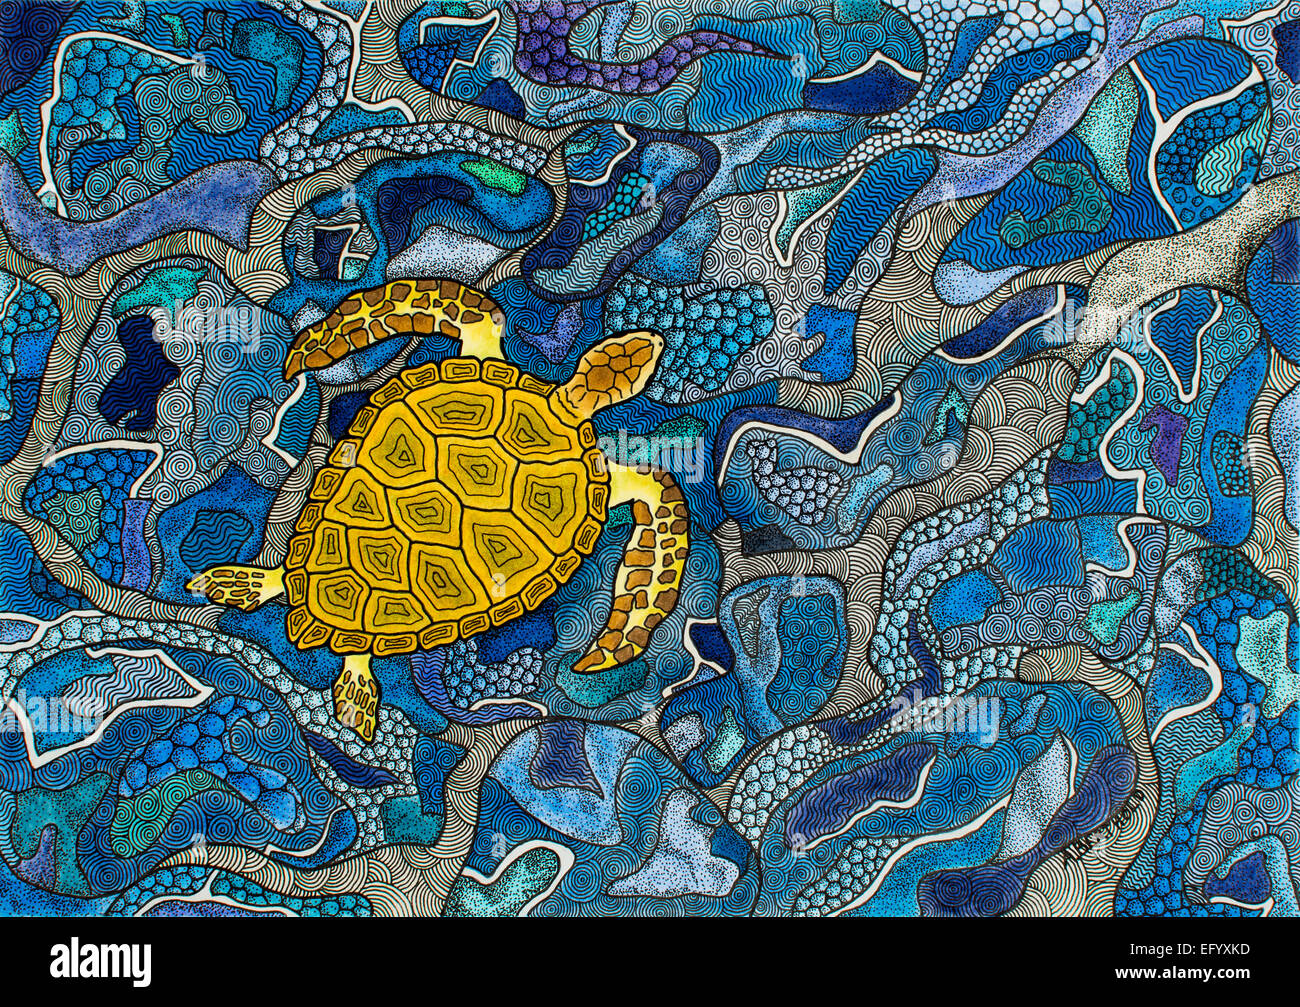 Drawing Of A Yellow Seaturtle Floating In Textured Water Stock Photo